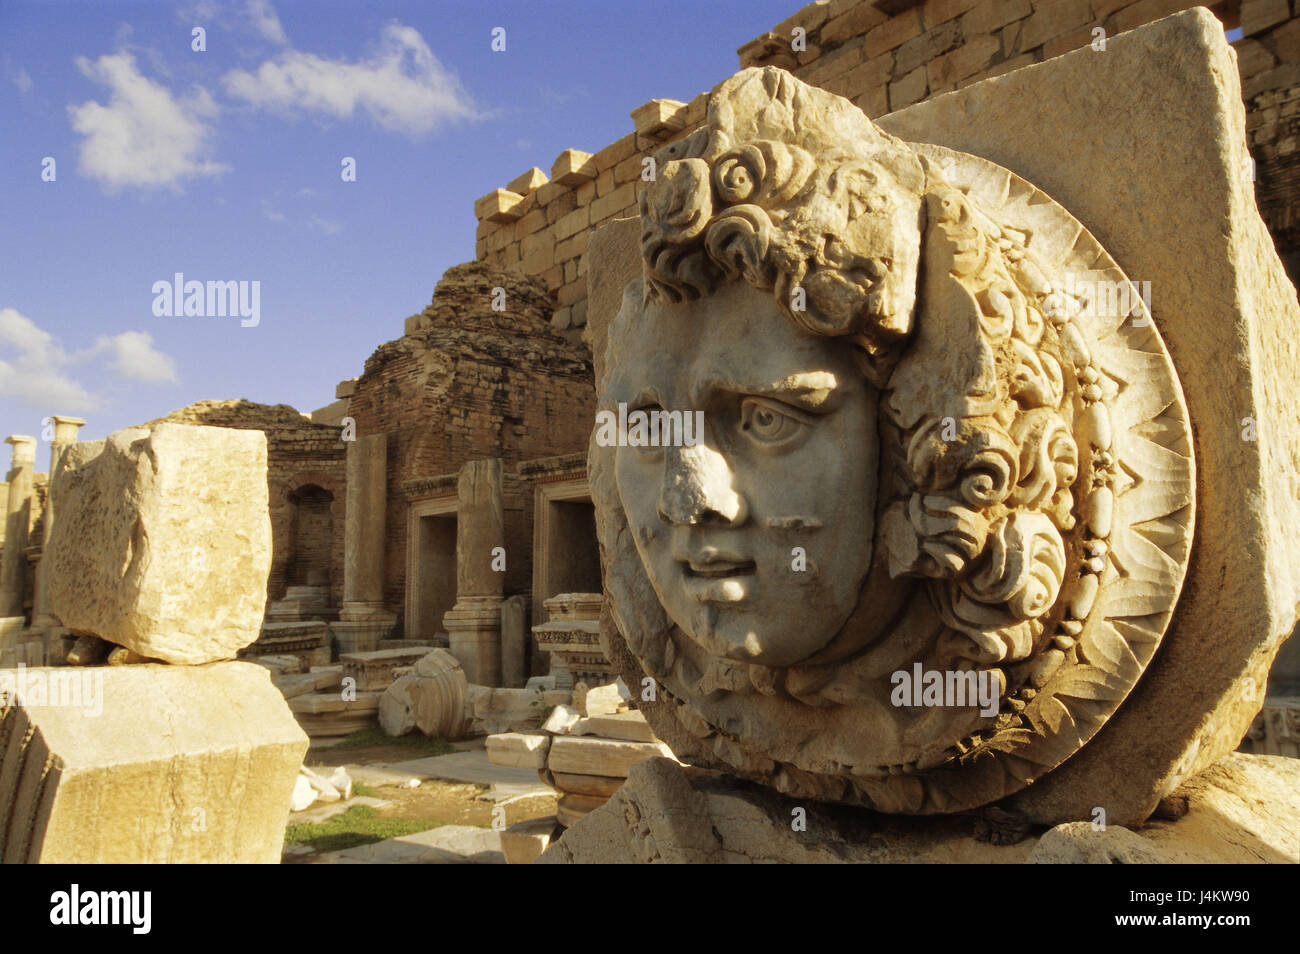 Libya, Tripolitanien, Leptis Magna, ruin site, Severisches forum, relief, head of Medusa Africa, North Africa, place of birth emperor Septimiu Severus, excavation site Roman, excavations, ruins, UNESCO-world cultural heritage, architecture, historically, antique, head of the Medusa, Gorgo, look, cultural monument, place of interest, defence, deterrence, fossilize, outside, conception, archeology, antiquity, past, mythology Stock Photo